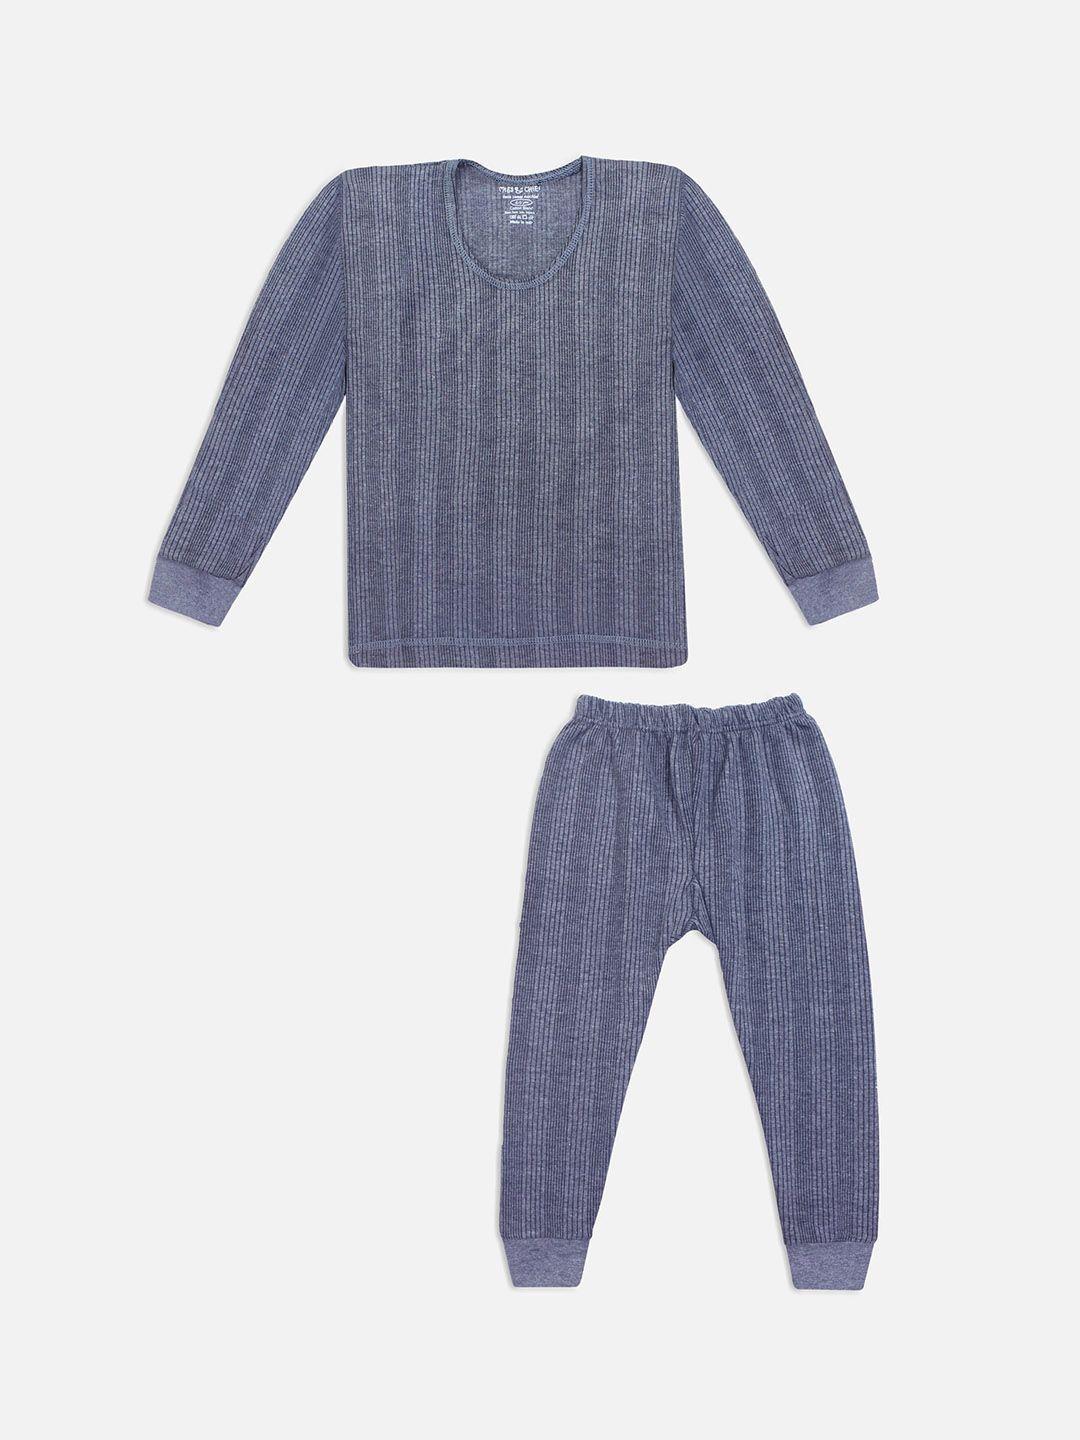 miss & chief kids blue striped thermal sets